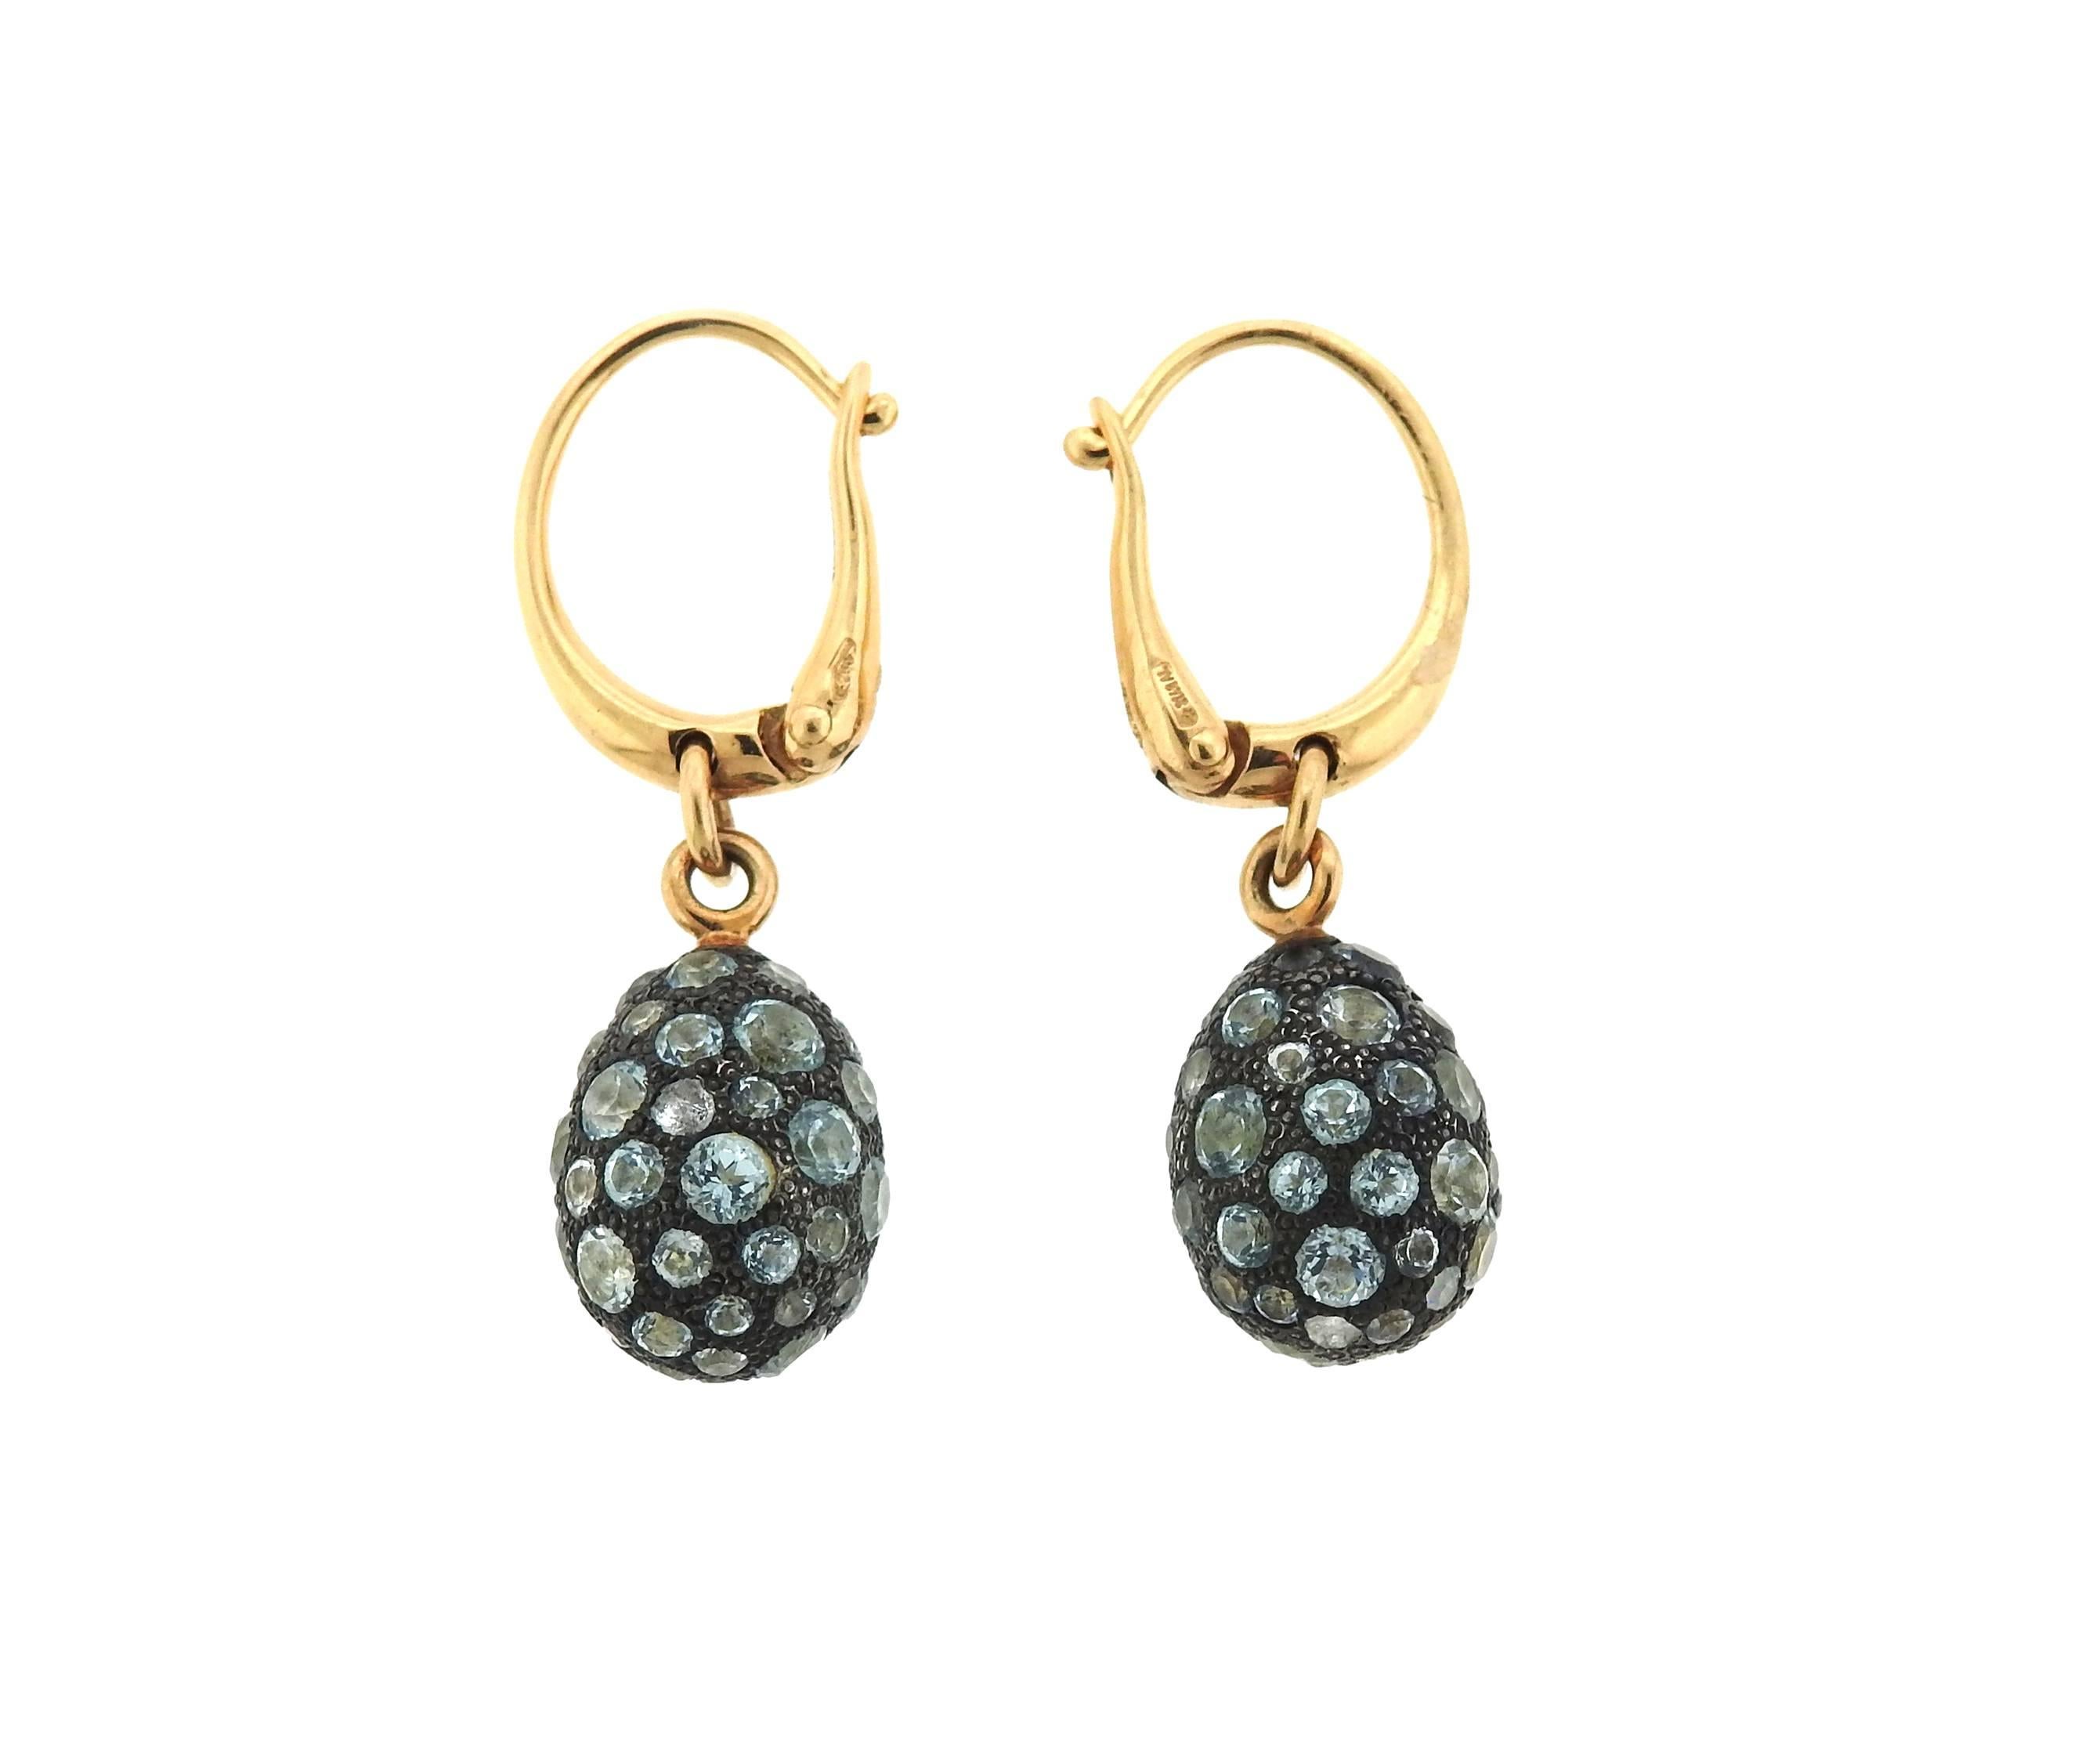 A pair of 18k gold and burnished silver drop earrings, crafted by Pomellato for Tabou collection, set with blue topaz. Earrings are 30mm long x 9mm wide. Weight - 9.8 grams. Retail for $5150 